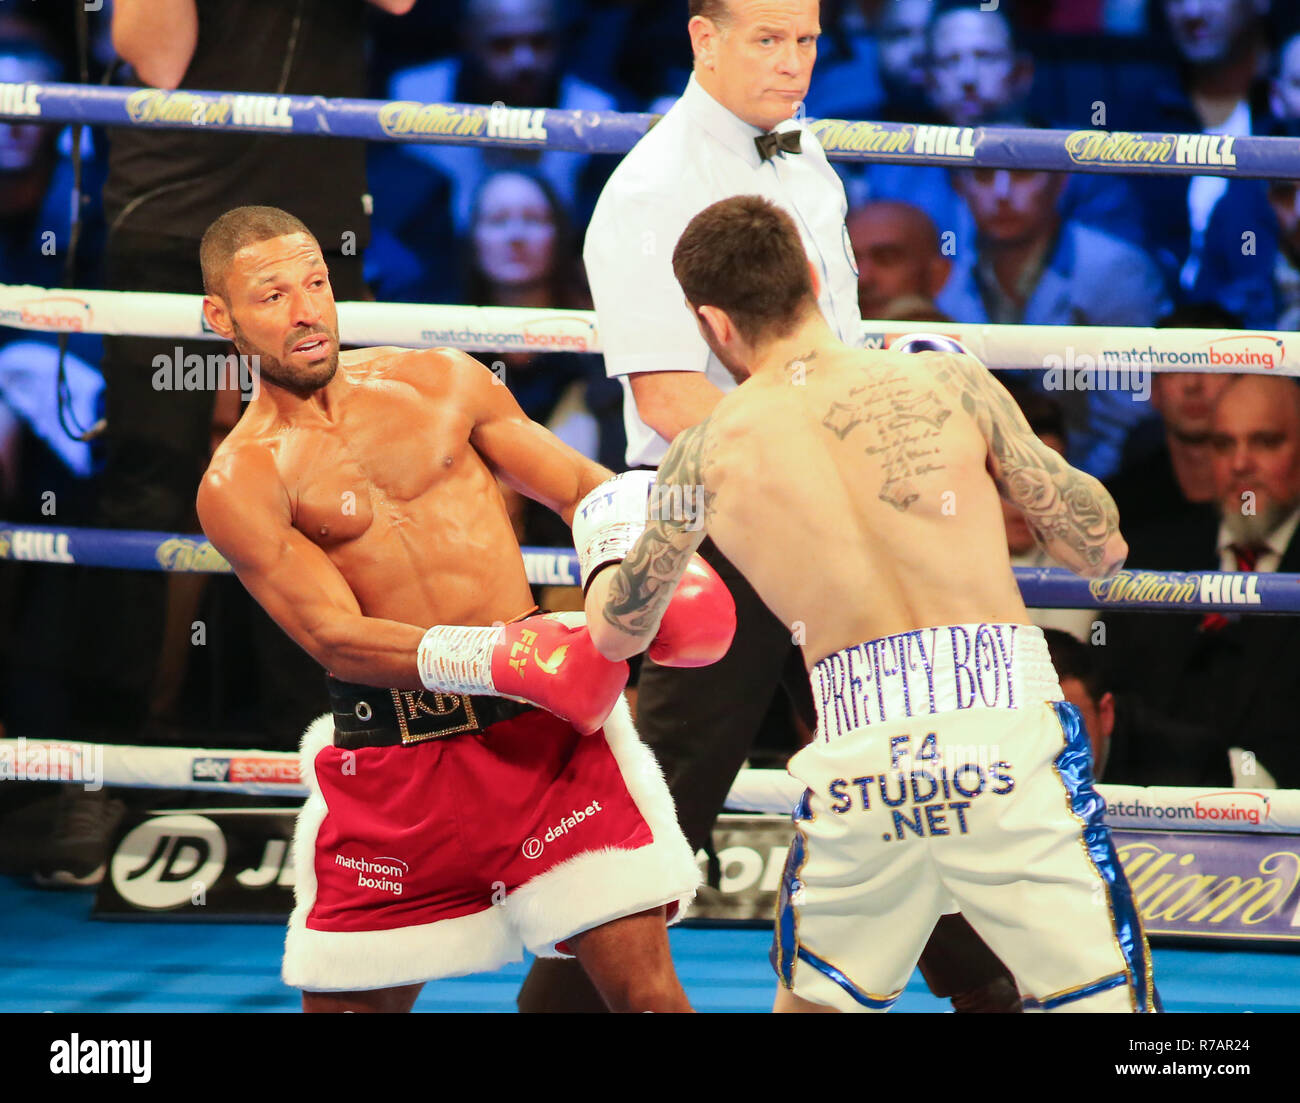 Sheffield, UK. 8th Dec 2018.   Kell Brook (Red Shorts) v Michael Zerafa (White/Blue Shorts) during the Final Eliminator contest for the WBA World Super-welterweight Title.  Credit: Touchlinepics/Alamy Live News Stock Photo